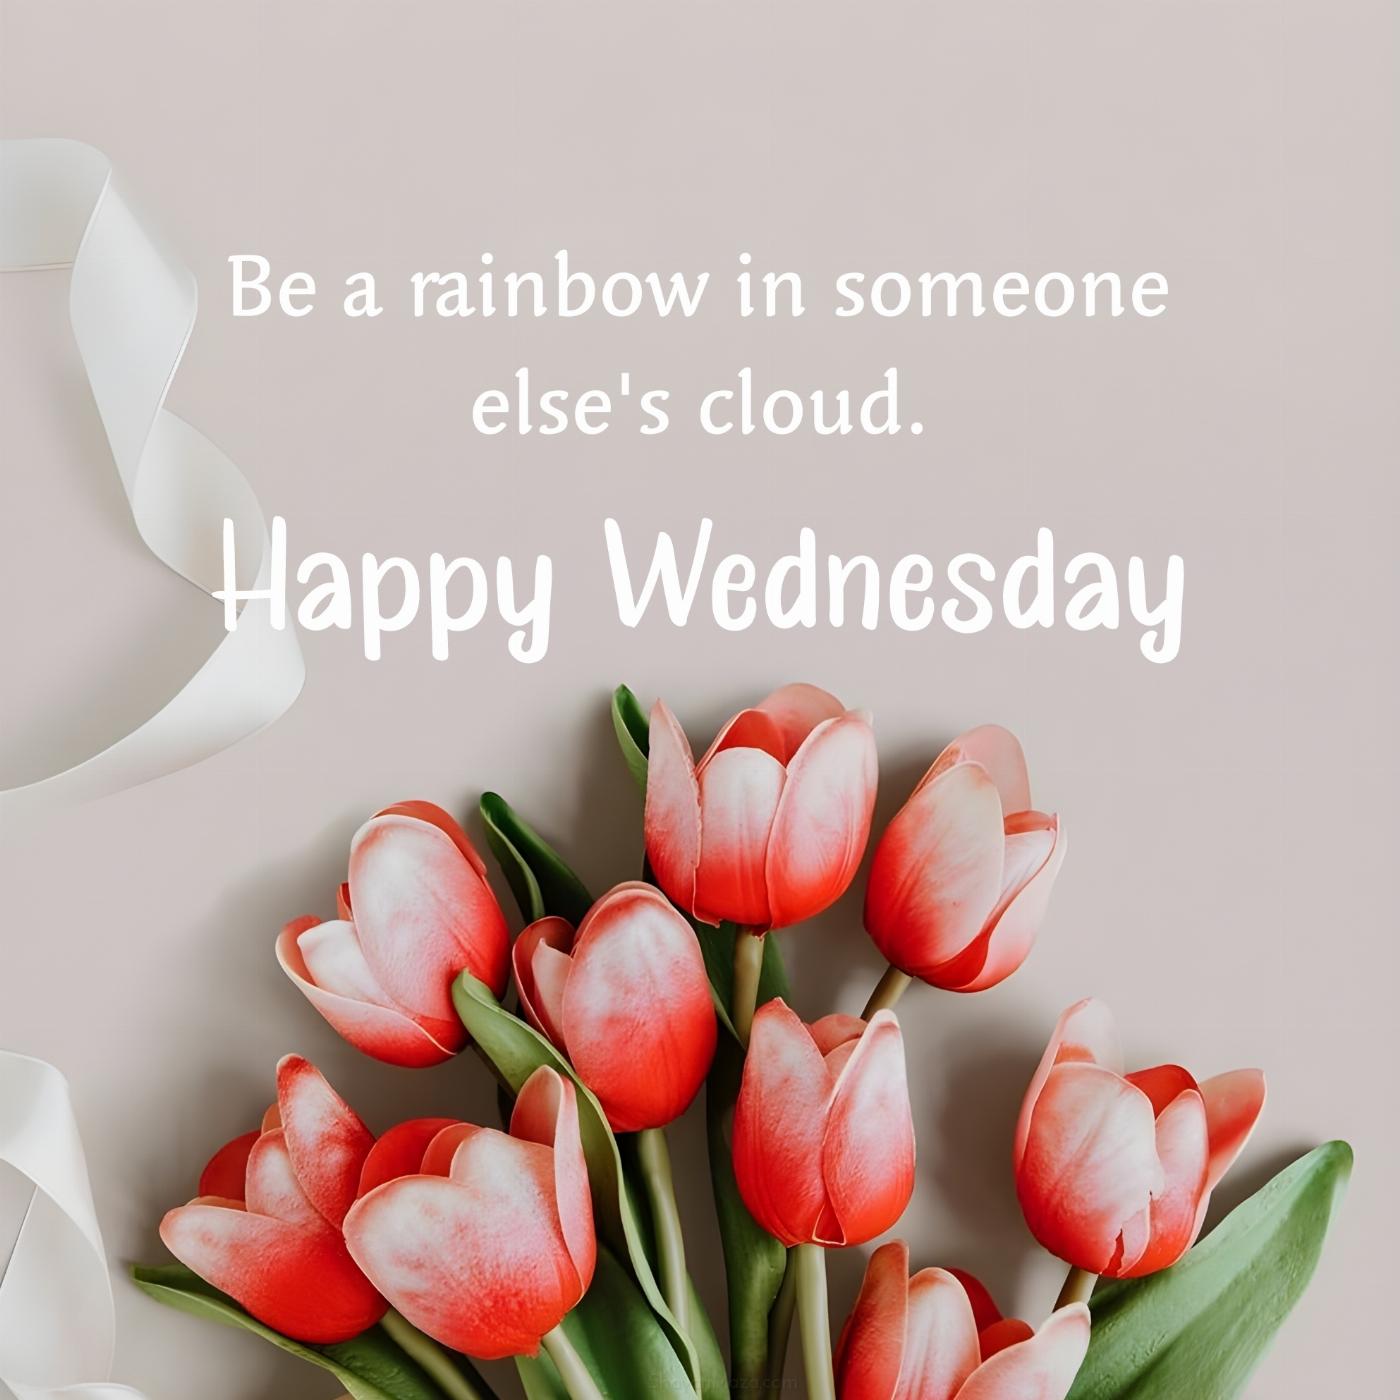 Happy Wednesday! Be a rainbow in someone else's cloud